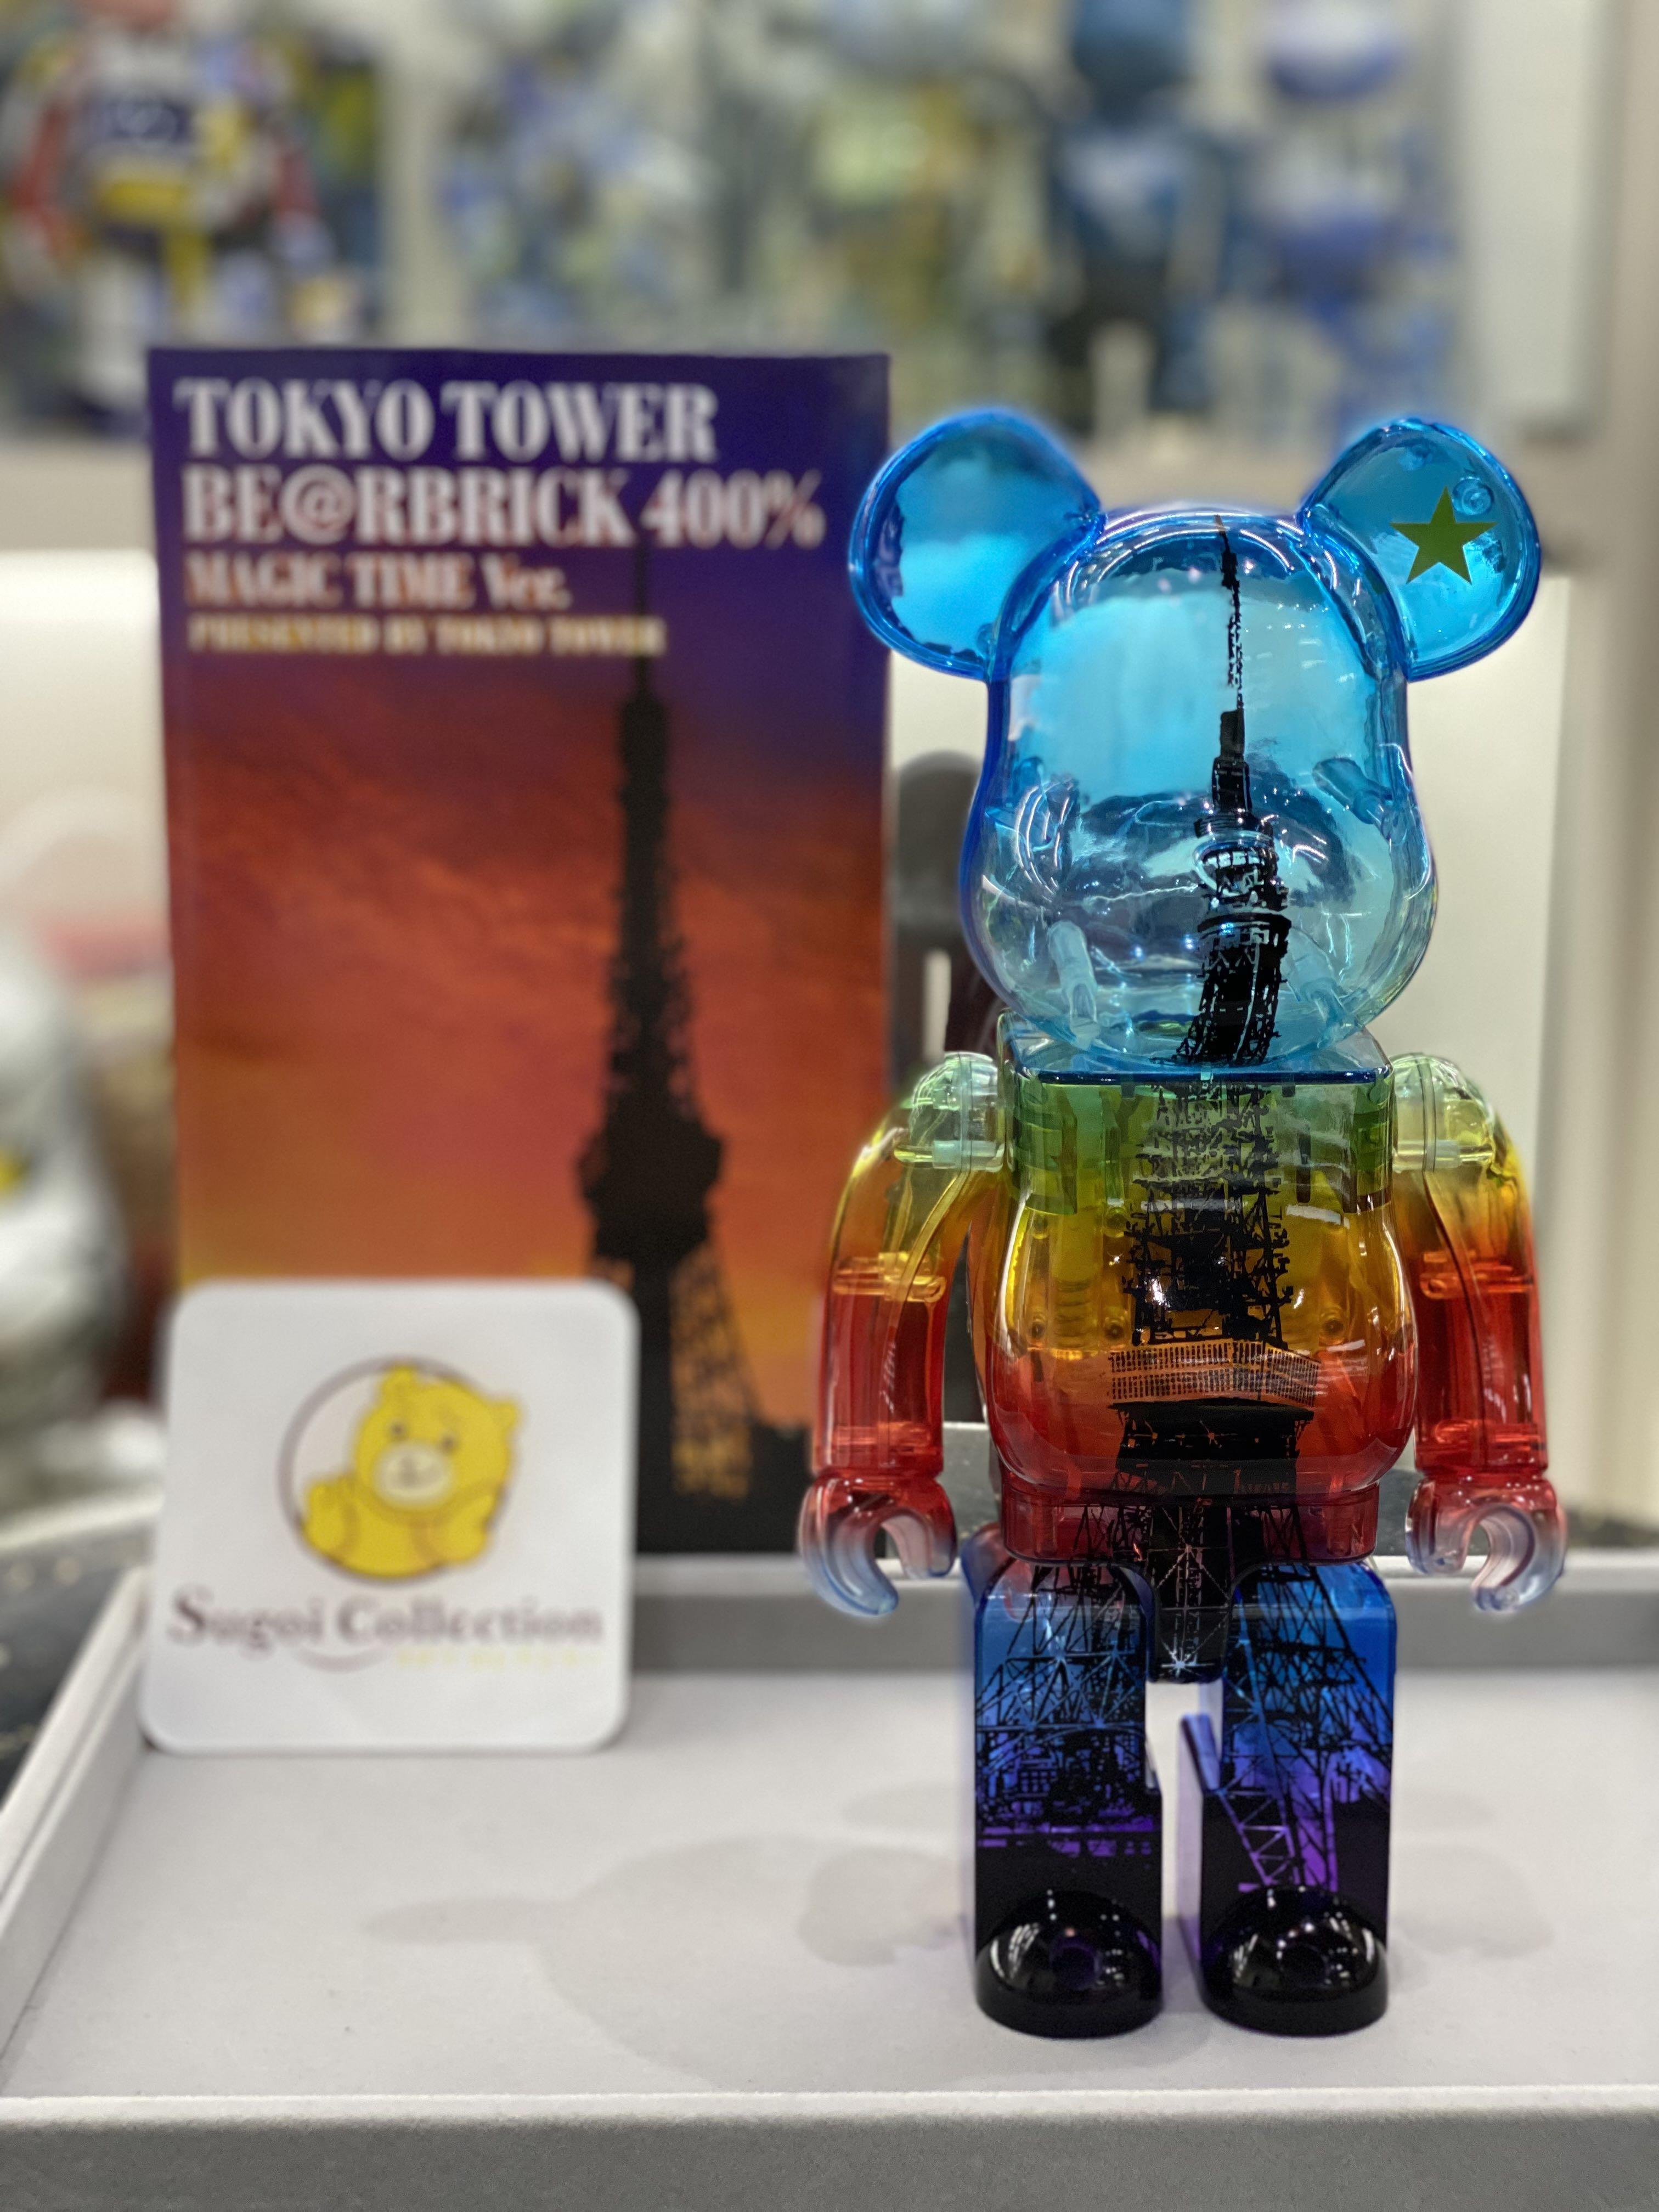 BE@RBRICK TOKYO TOWER 400％ MAGIC TIME wim-network.org